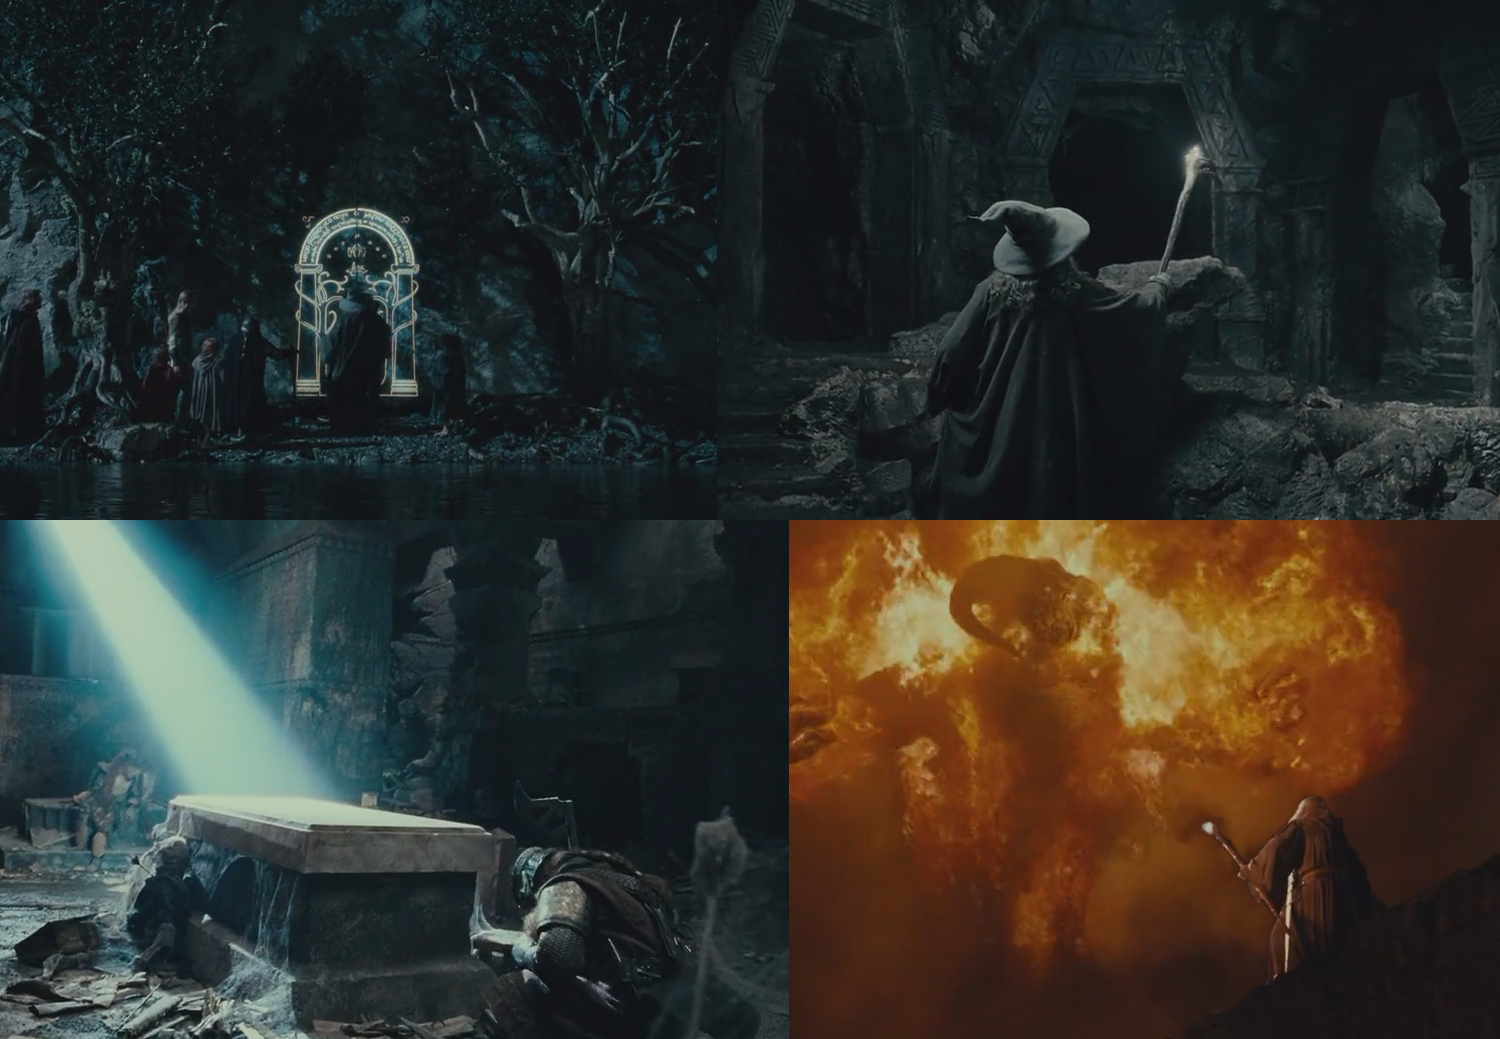 Lord of the Rings: Fellowship of the Rings - Moria